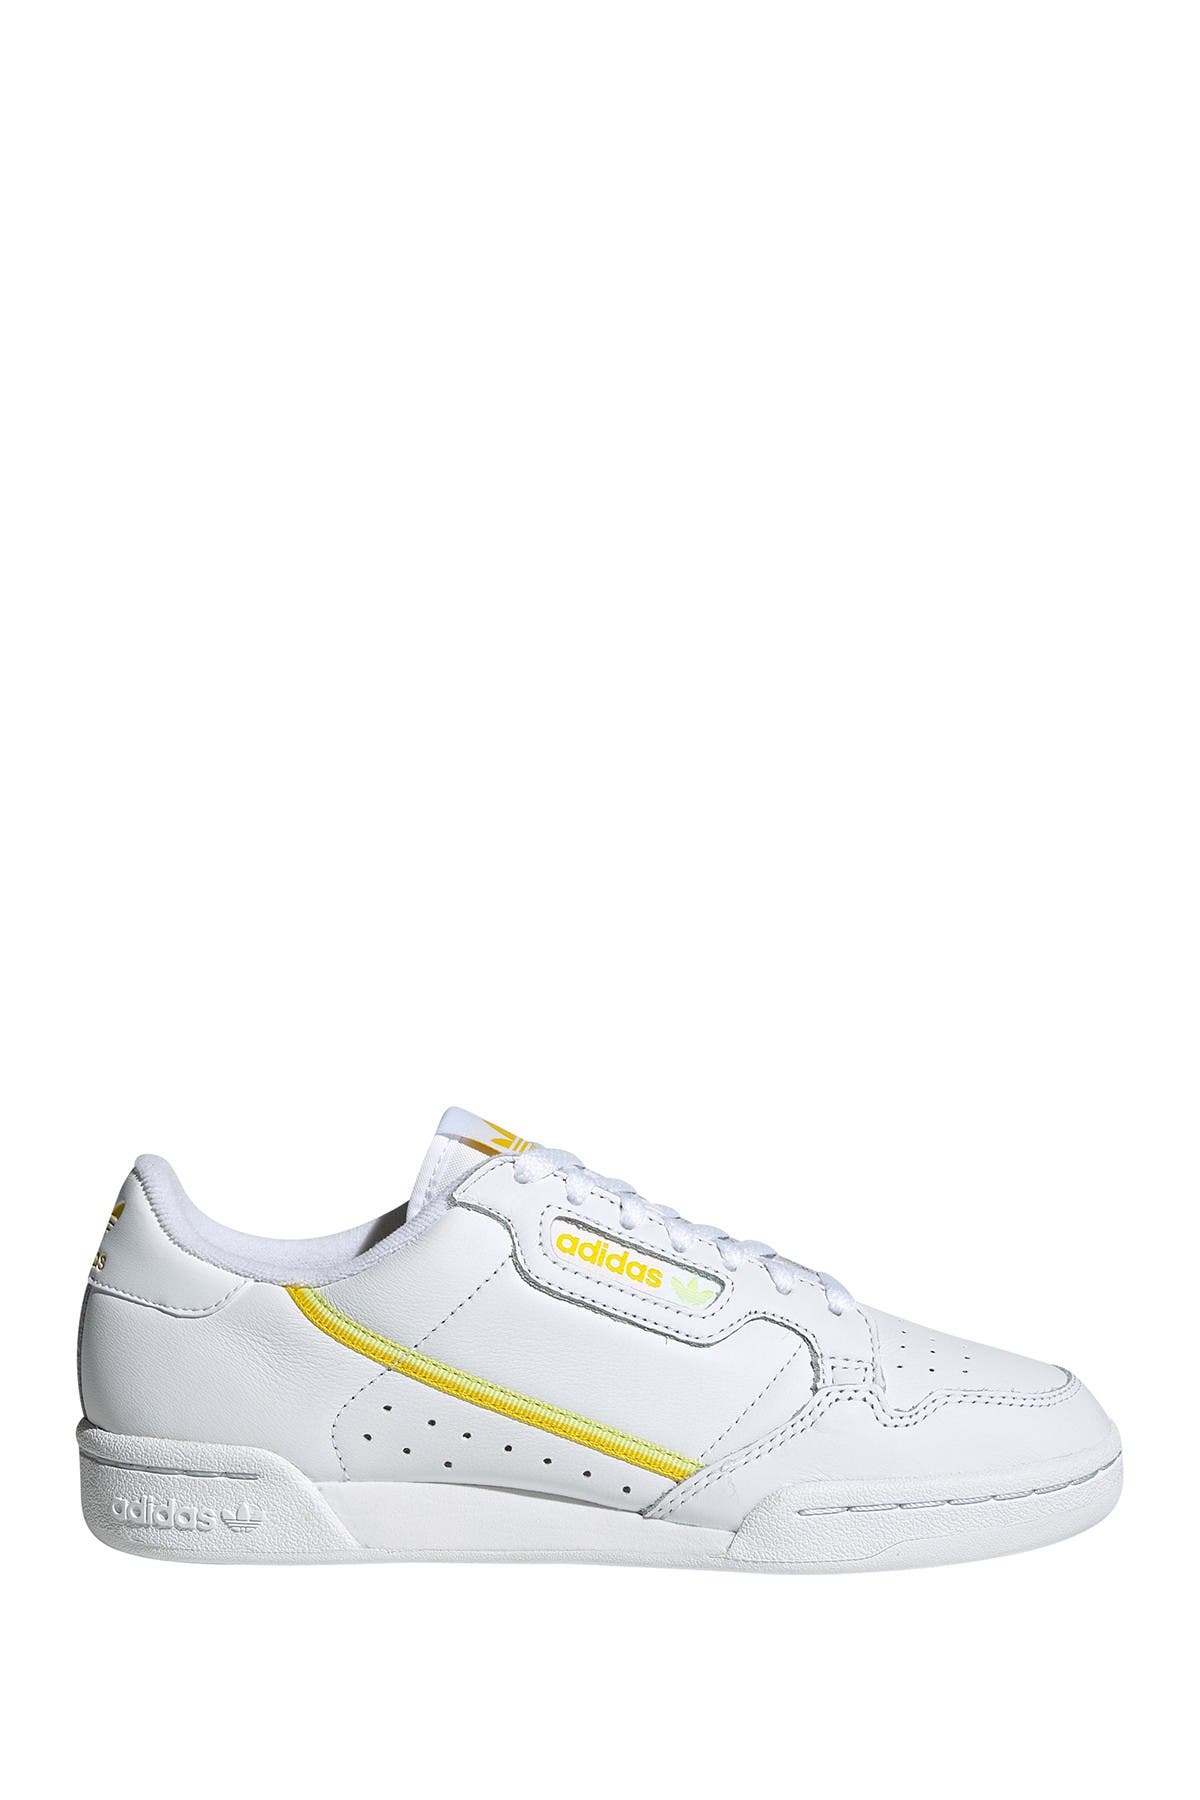 adidas continental 8s shoes